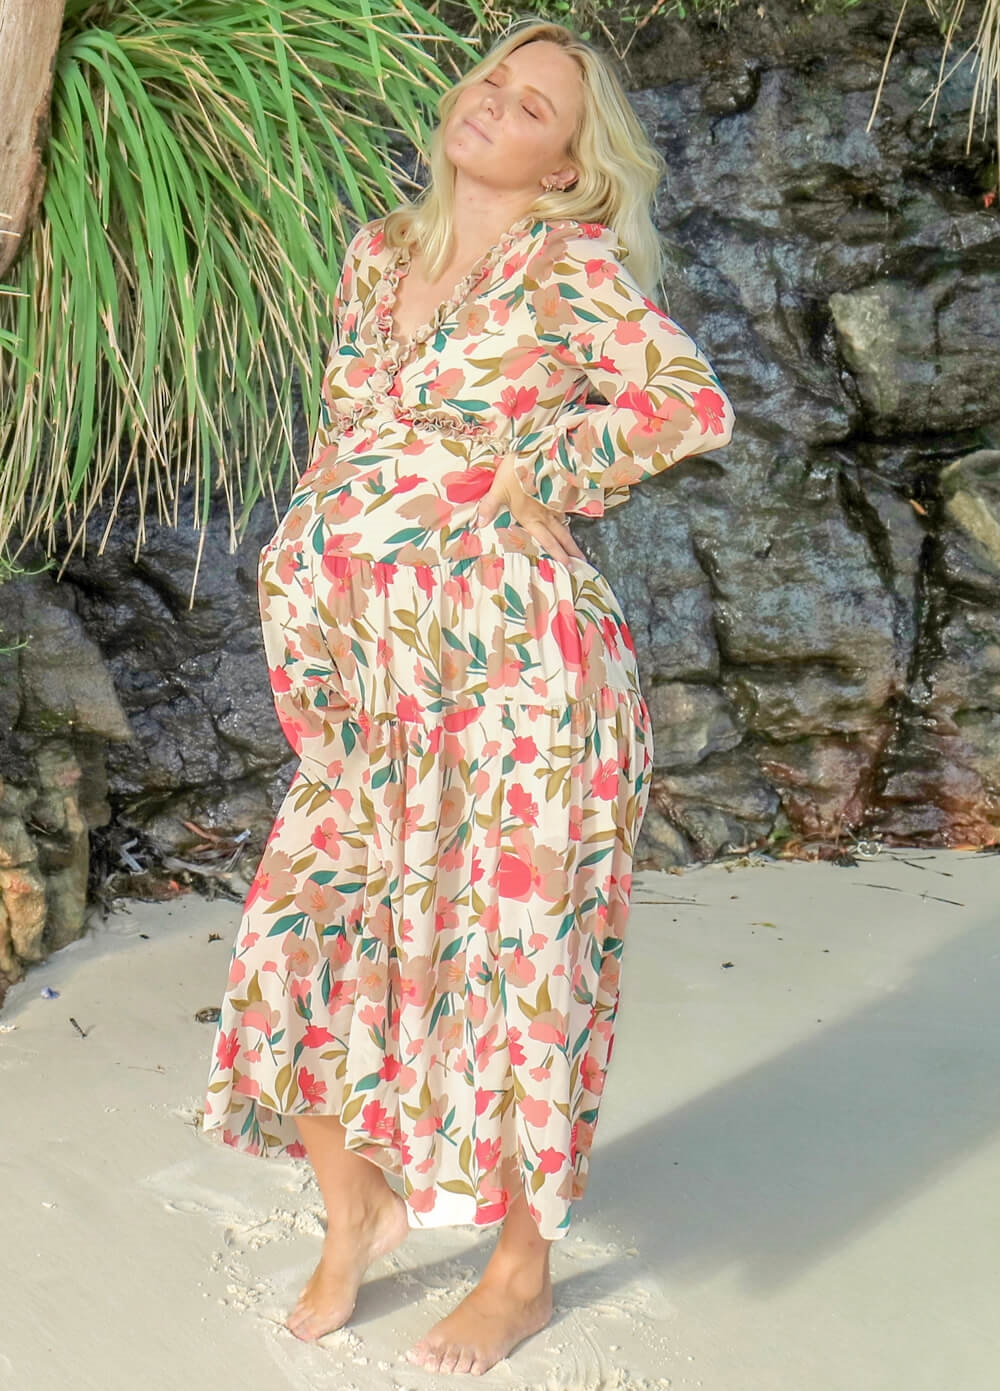 Lait & Co - Wanderlust Maternity Maxi Gown in Apricot Floral